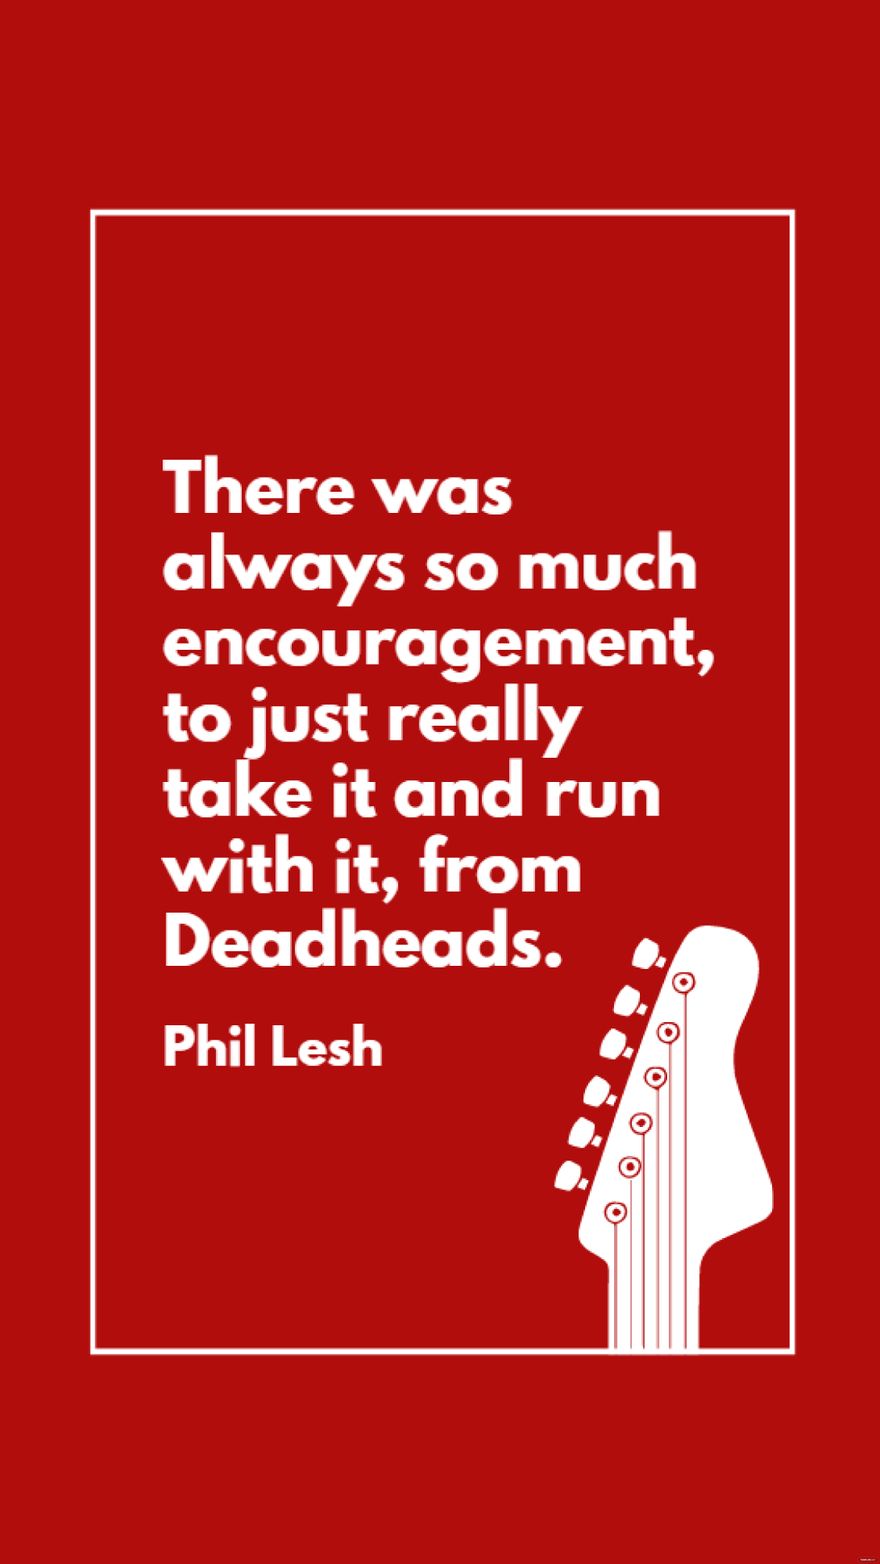 Free Phil Lesh - There was always so much encouragement, to just really take it and run with it, from Deadheads. in JPG